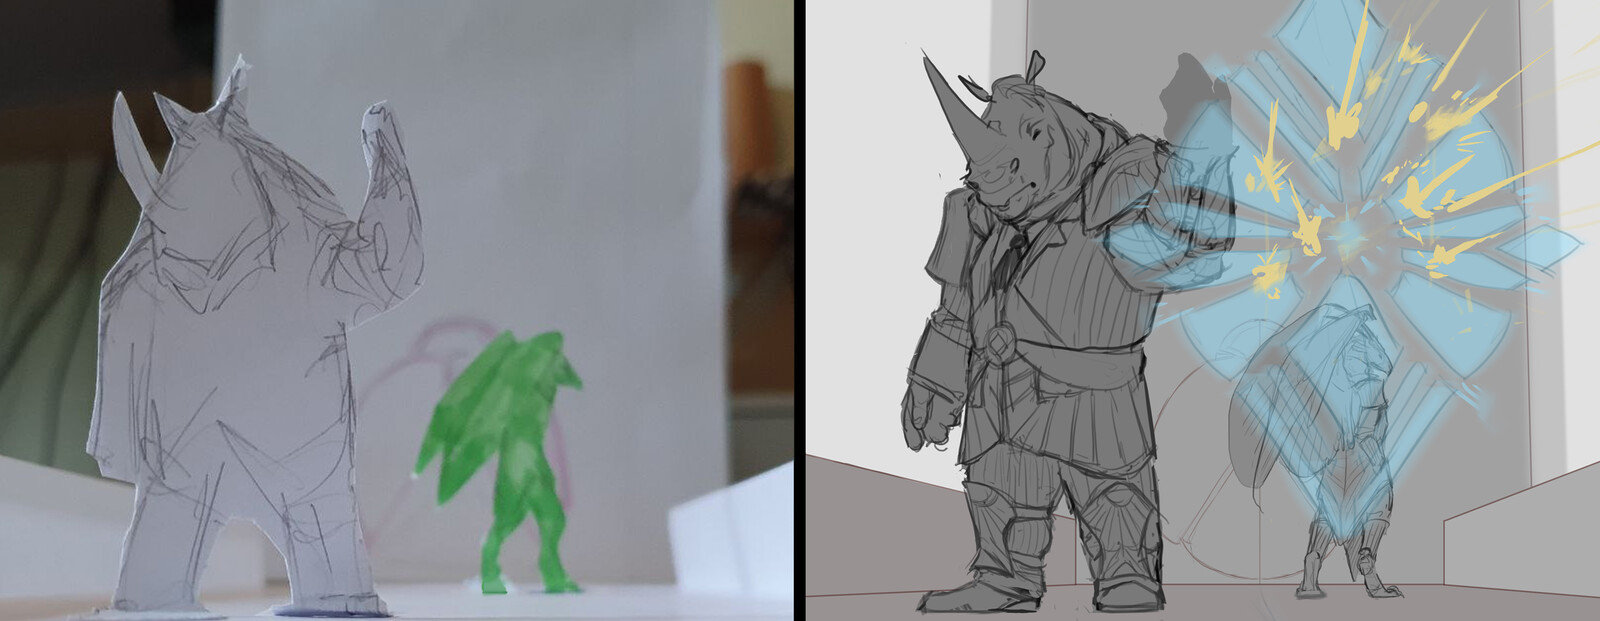 Updated sketch + paper model for quick perspective reference